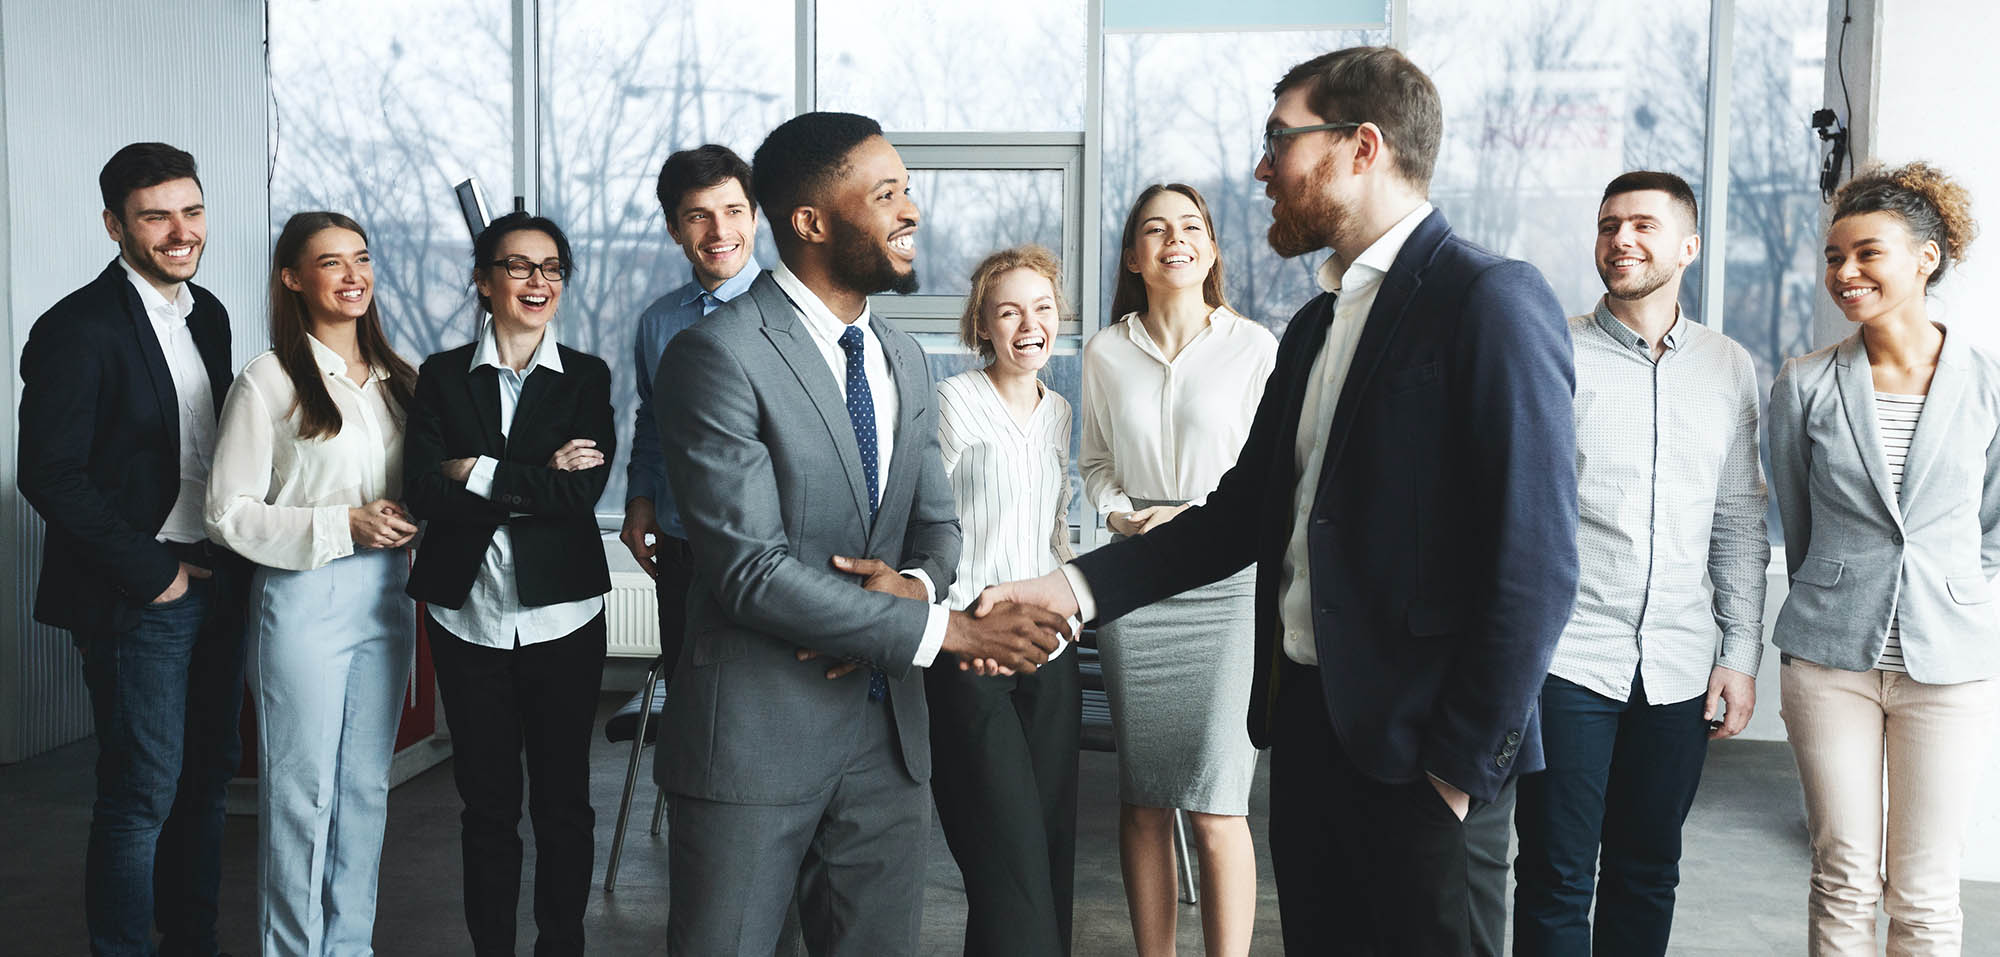 How to Hire a More Diverse Workforce